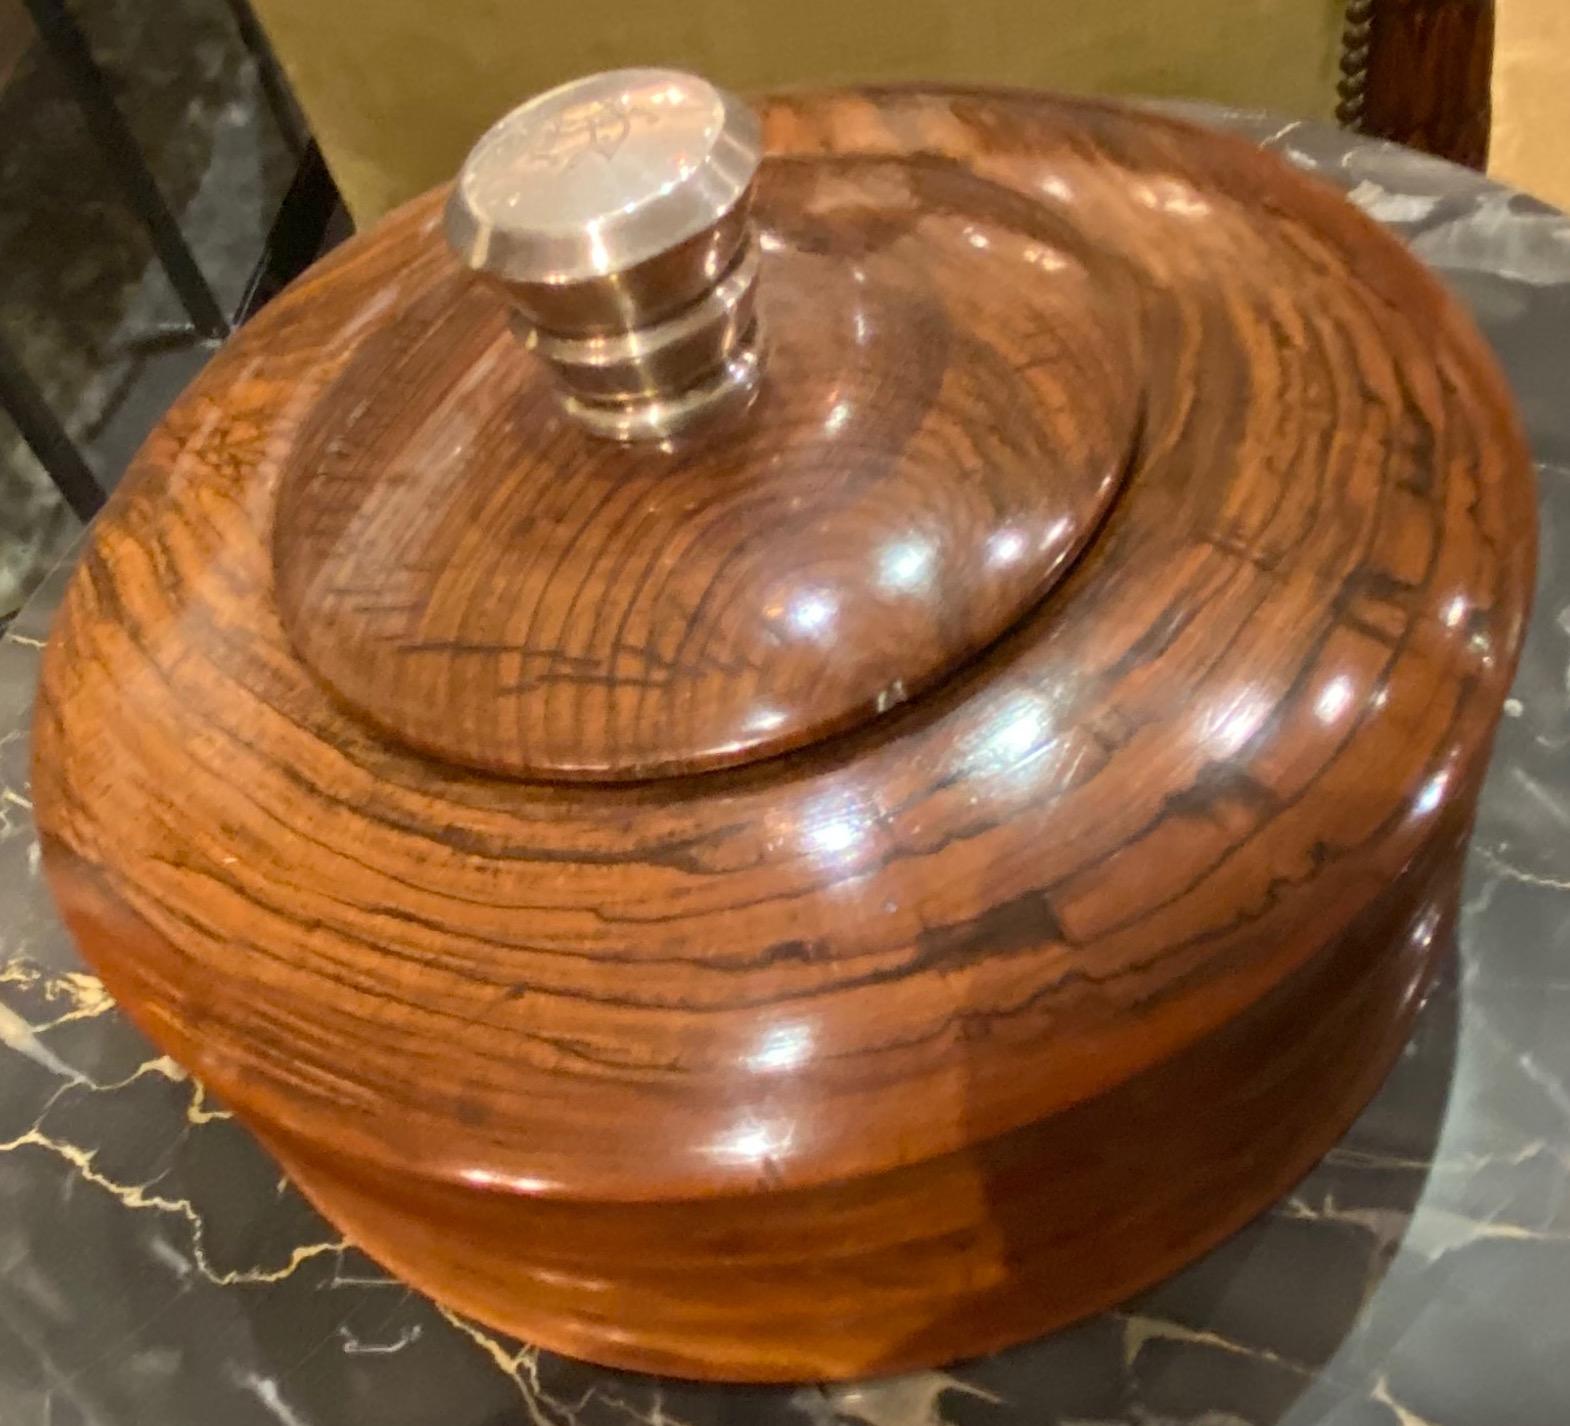 Art Deco round wood box with silver faceted monogrammed top. Unusual faceted carved round solid wood box. Well made with a fitted top, this box might be used to store some very special objects: jewelry, smoking paraphernalia or your favorite objects